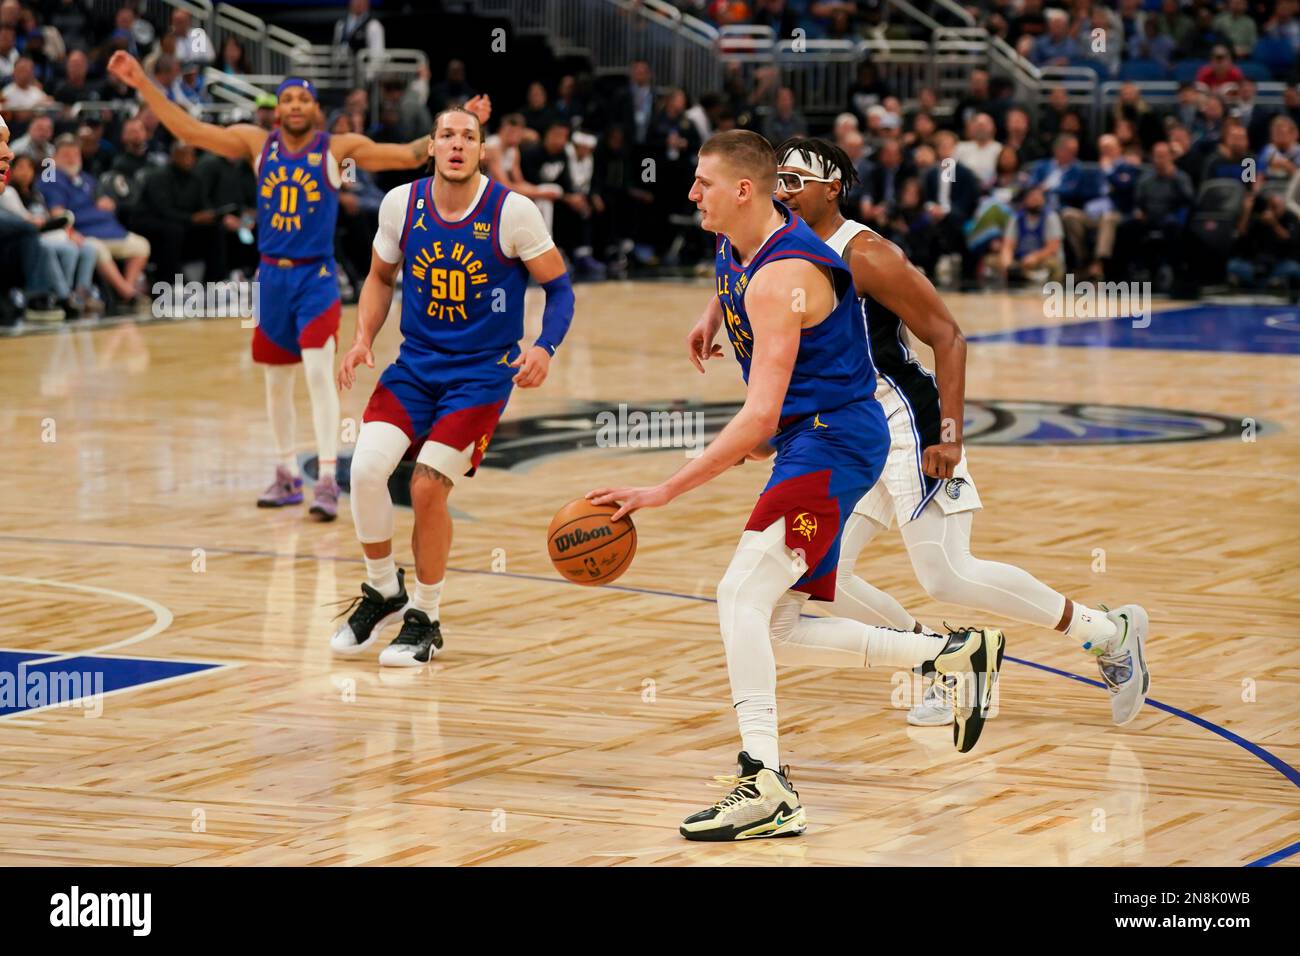 Orlando, United States. 09th Feb, 2023. Orlando, USA, February, 9th 2023: Nikola Jokic (Denver) controls the ball during the NBA basketball match between Orlando Magic and Denver Nuggets at Amway Center in Orlando, Florida, United States. (No commercial usage) (Daniela Porcelli/SPP) Credit: SPP Sport Press Photo. /Alamy Live News Stock Photo